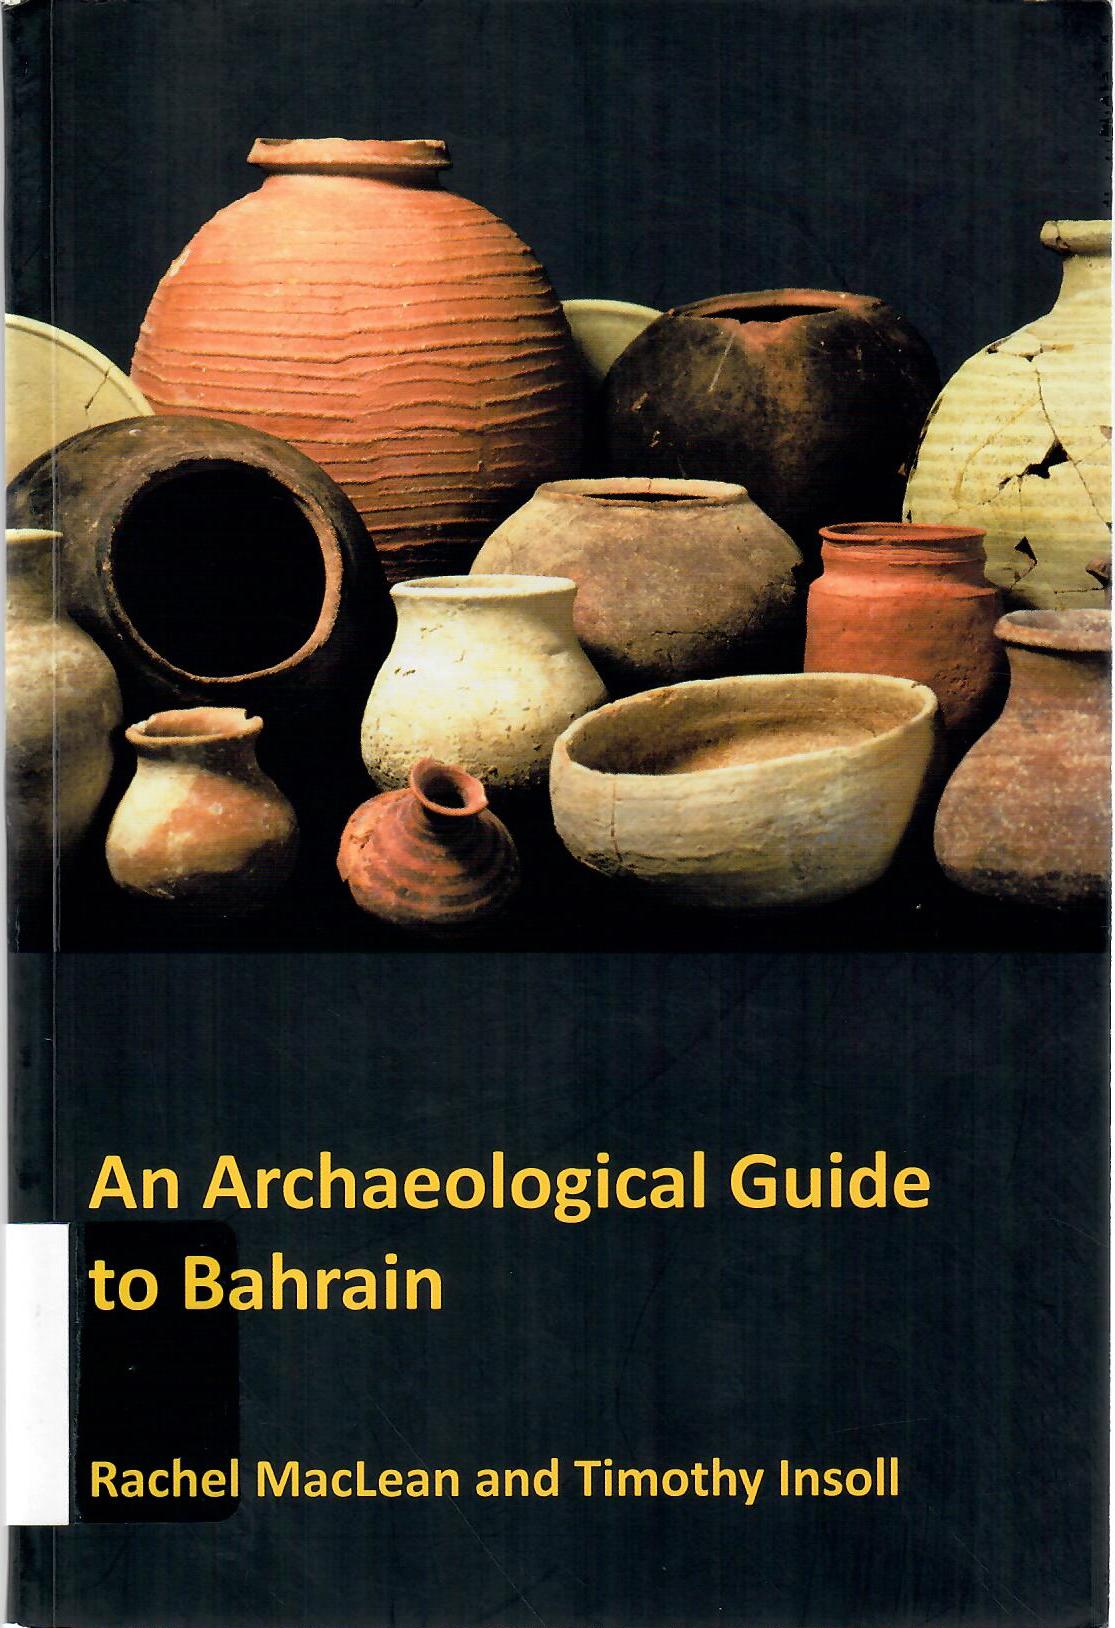 An Archaeological Guide to Bahrain